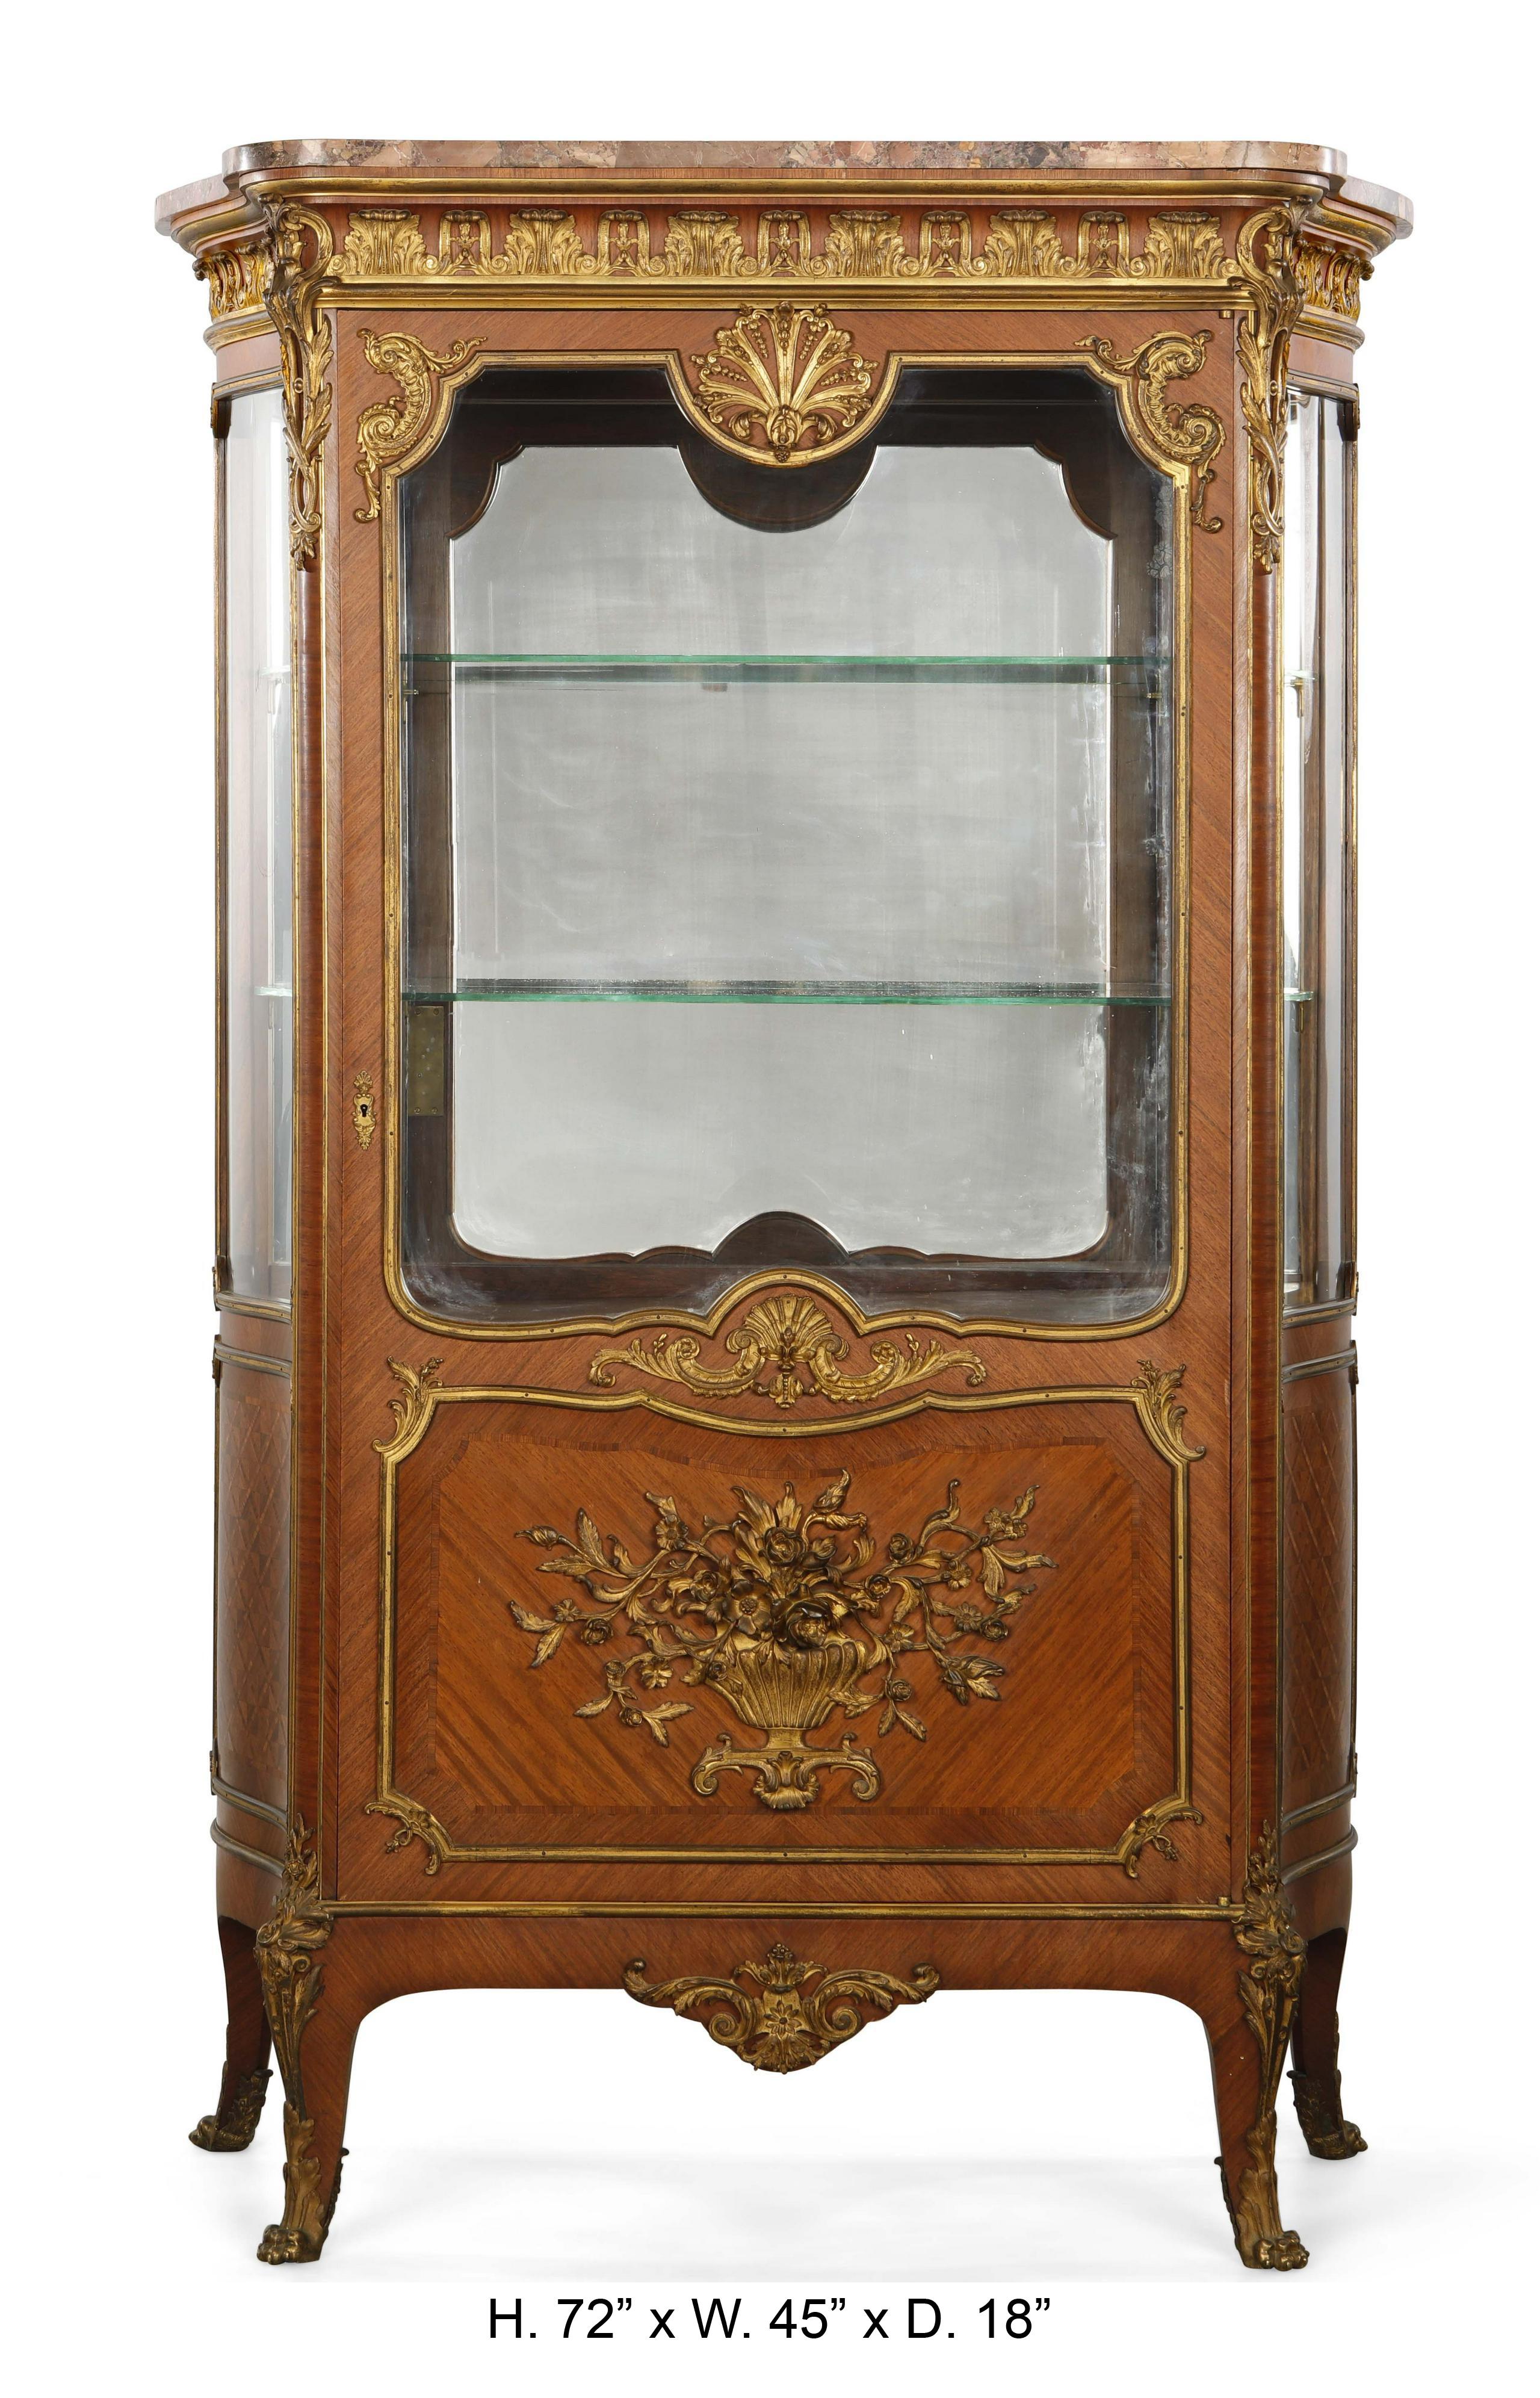 Exquisite French Louis XV style gilt bronze mounted mahogany vitrine cabinet. Ormolu signed FB. 
Late 19th century.

The spectacular vitrine is surmounted by a shaped mottled marble top, above an ormolu mounted frieze decorated with leaf-tip,